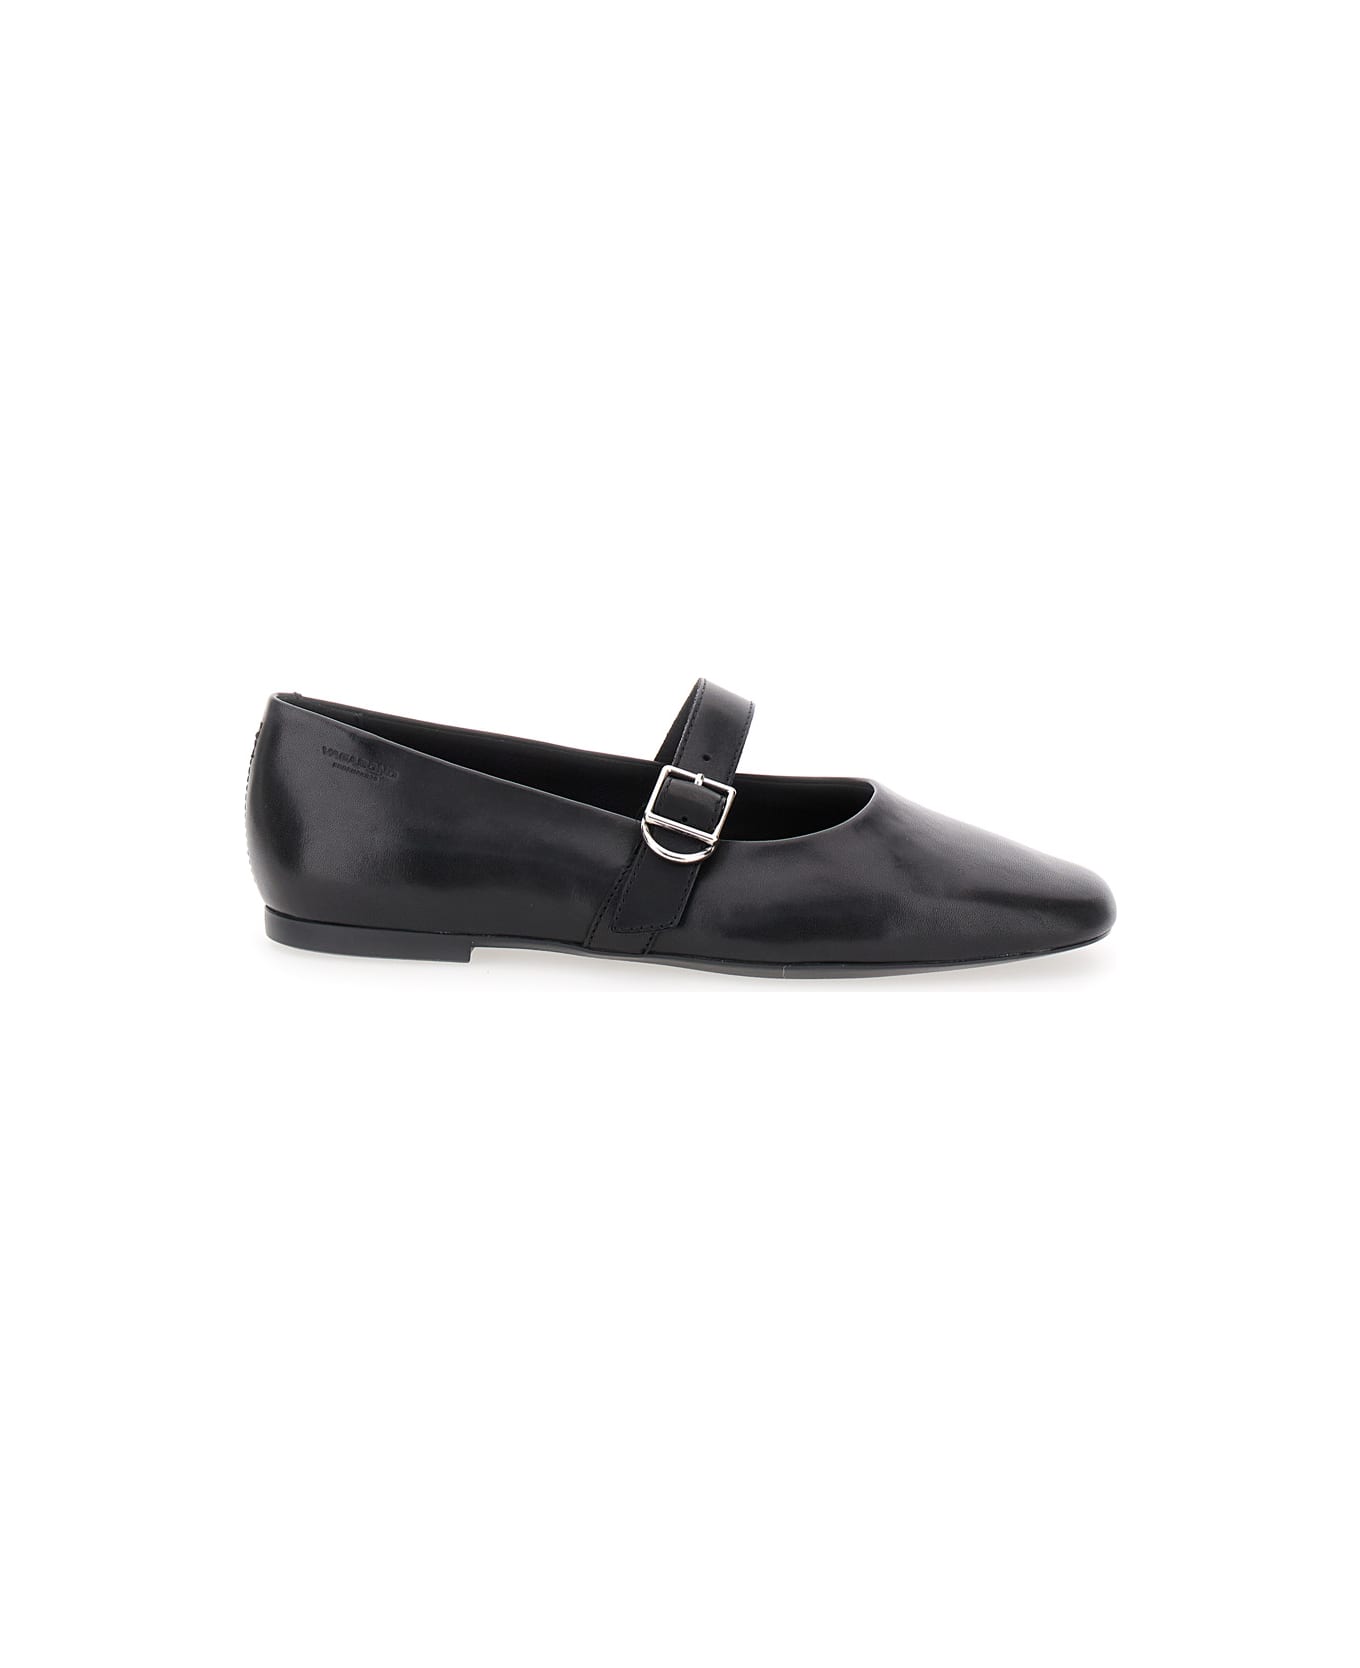 Vagabond 'jolin' Black Ballet Flats With Strap In Smooth Leather Woman - Black